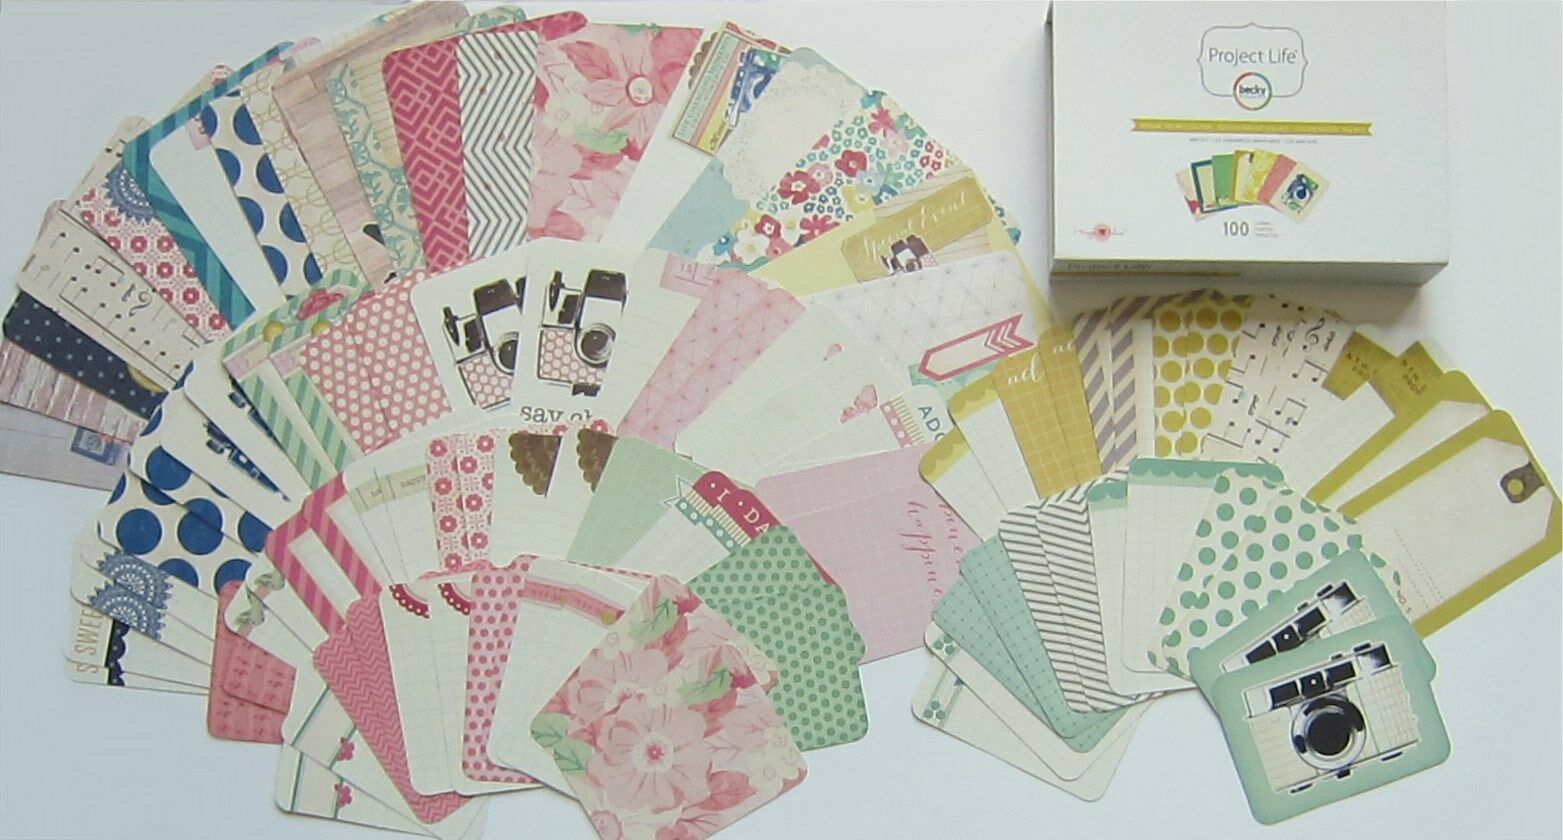 New! Project Life "becky Higgins"  [maggie Holmes] Mini Kit (100 Cards) Save 35%